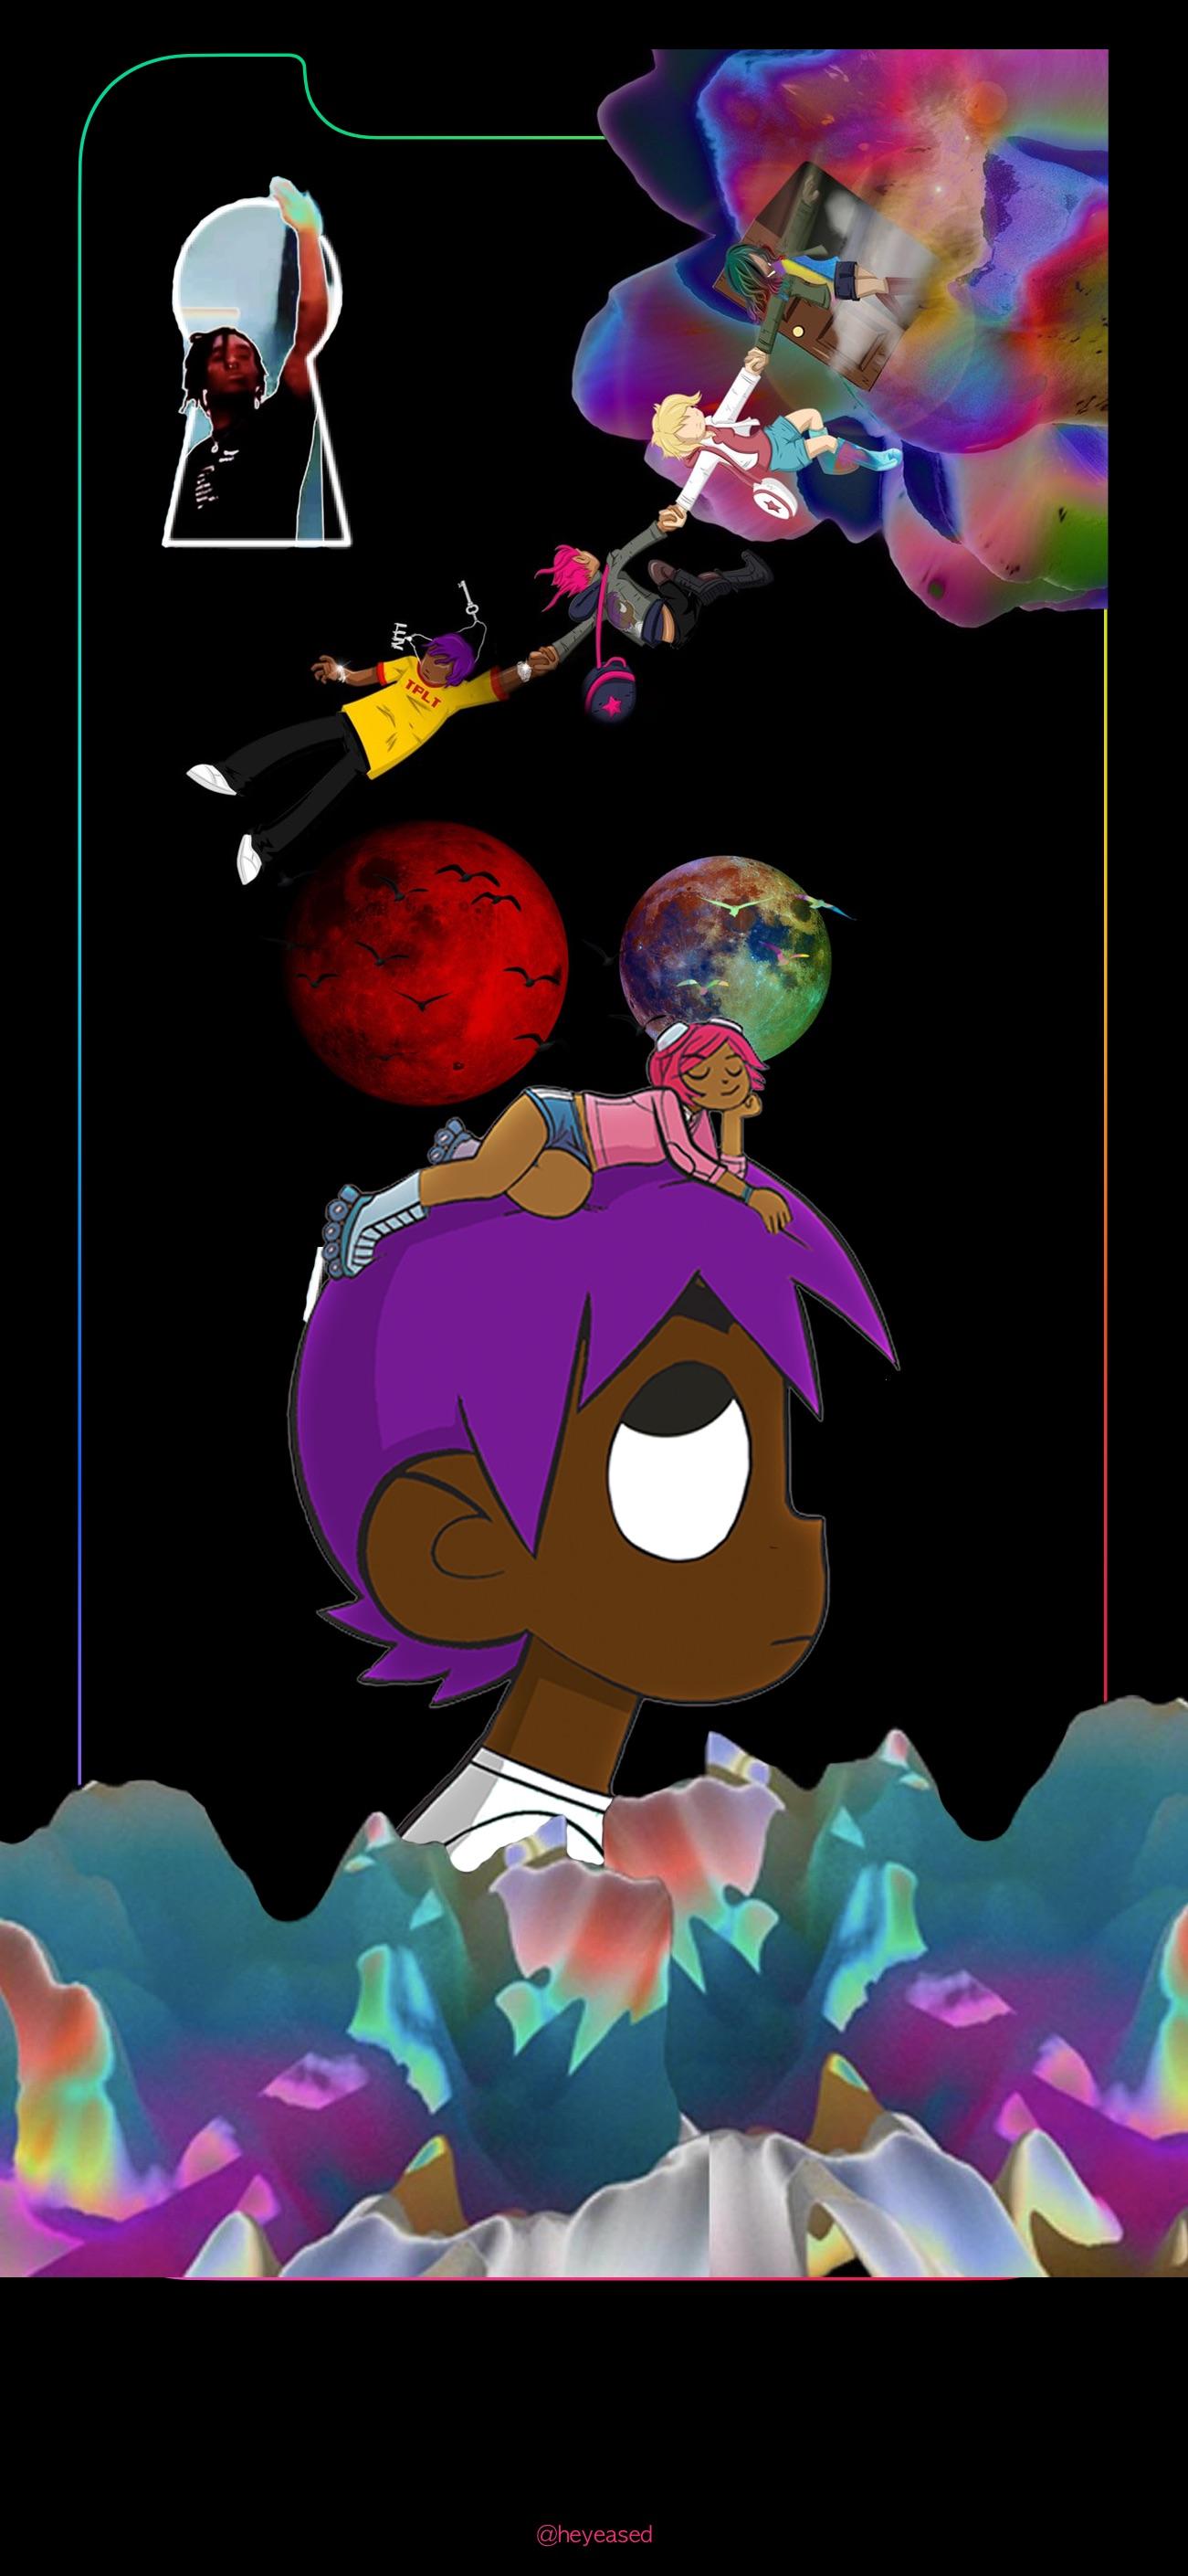 iPhone 12 wallpaper that I made if I was on the cover of VTW2   r liluzivert